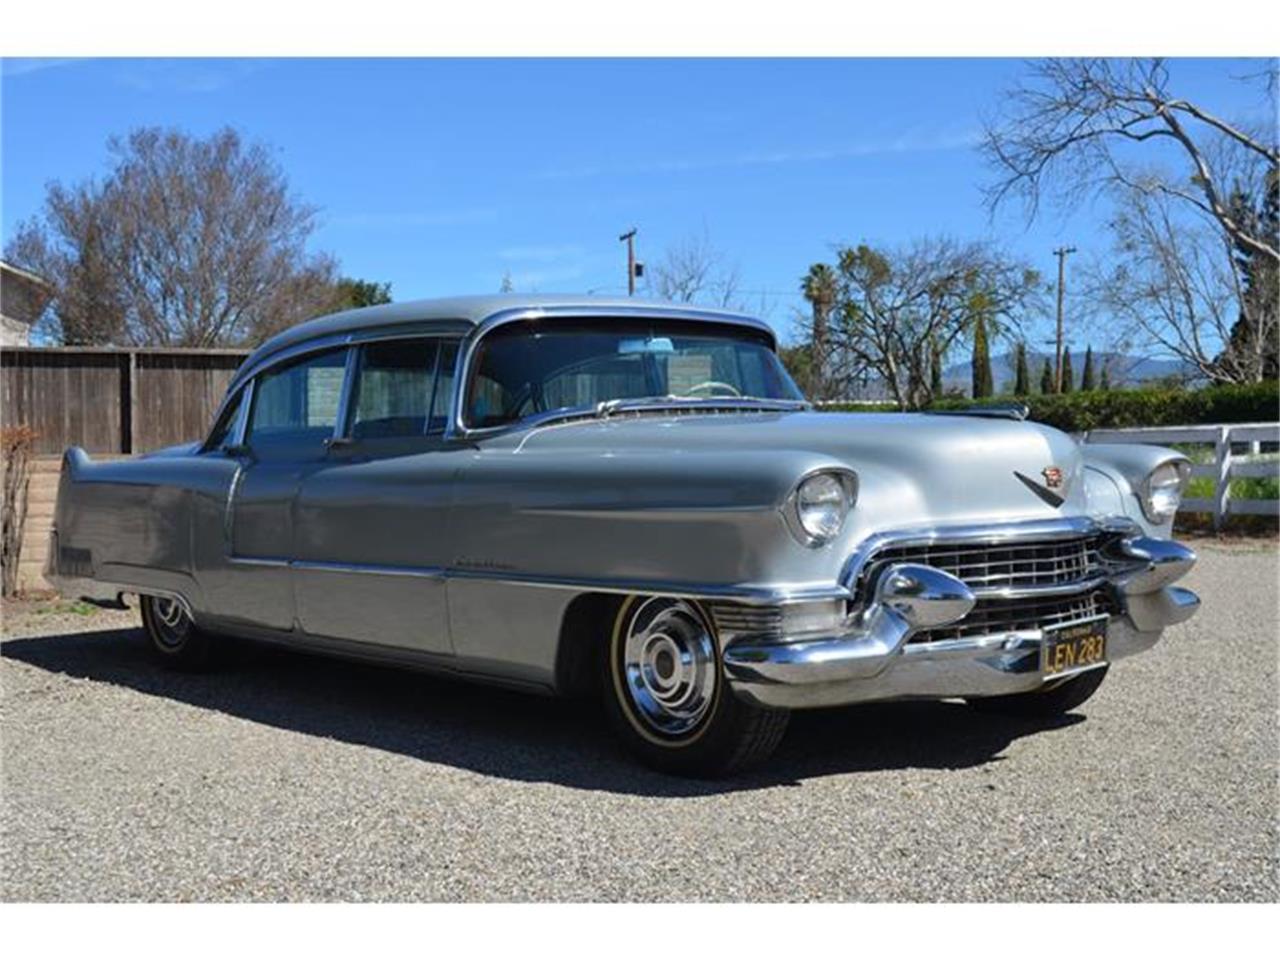 1955 Cadillac Fleetwood 60 Special for Sale CC647851